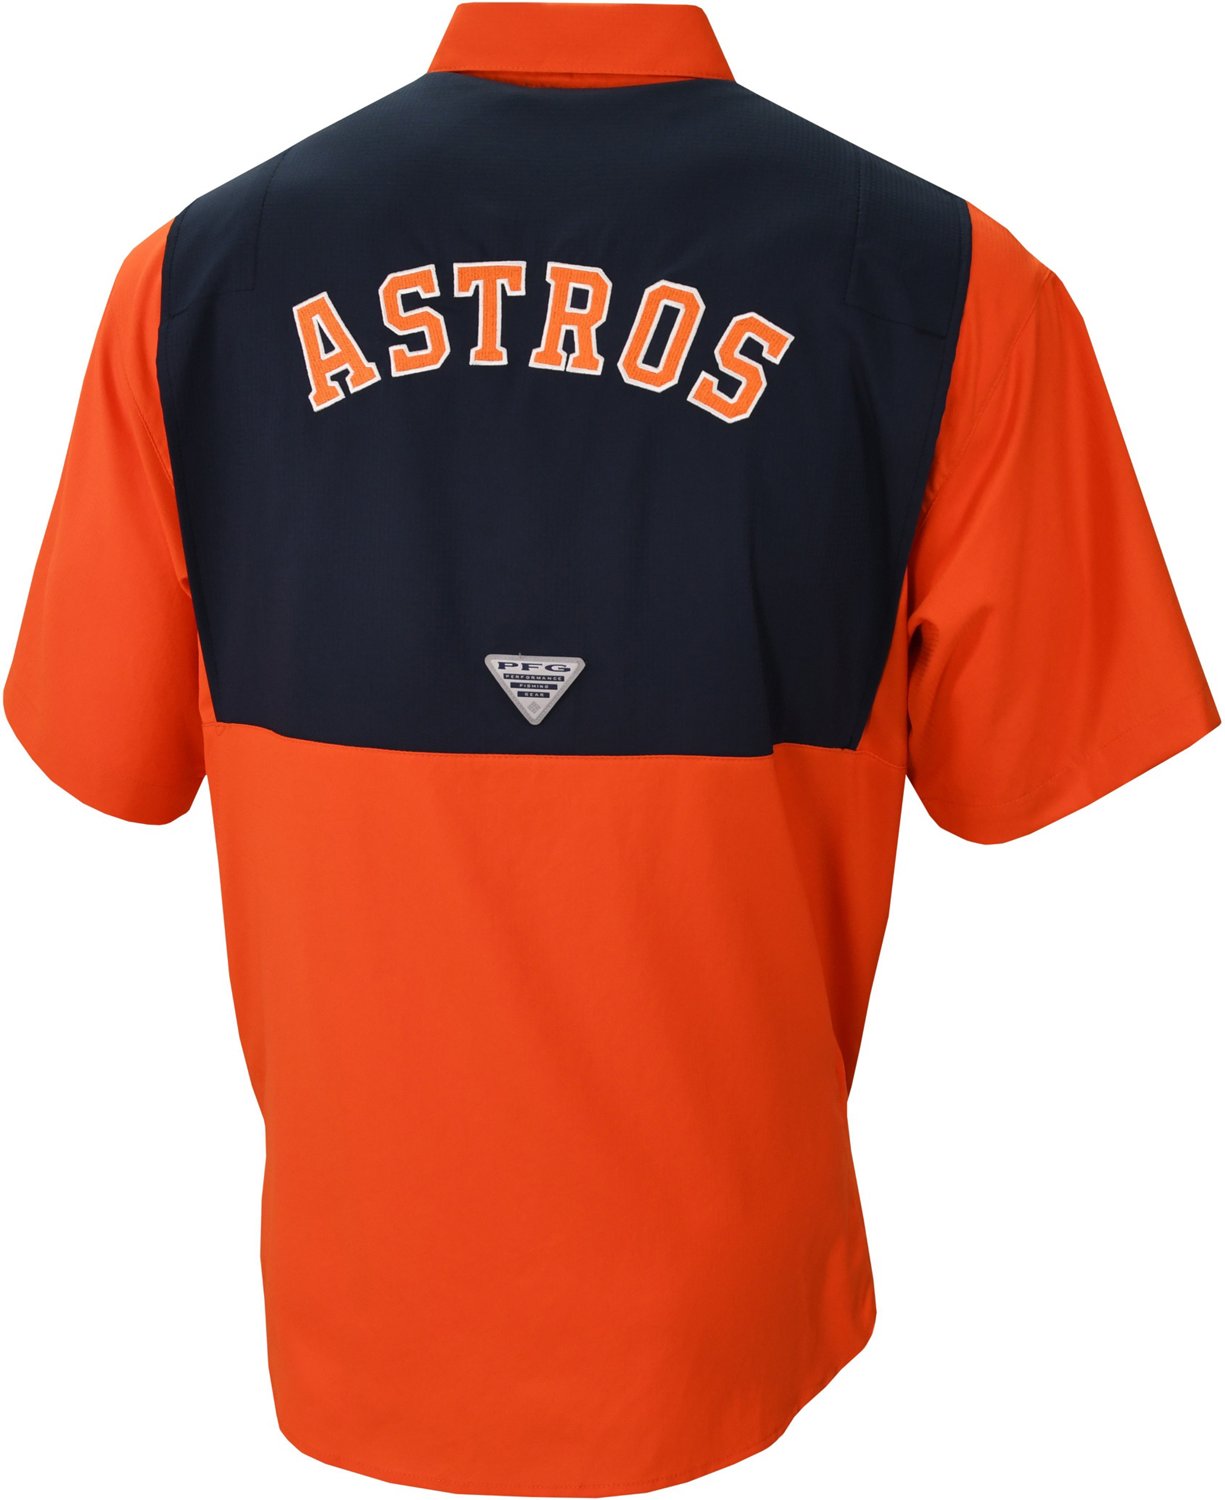 Houston Astros Columbia Fishing Shirt for Sale in Houston, TX - OfferUp